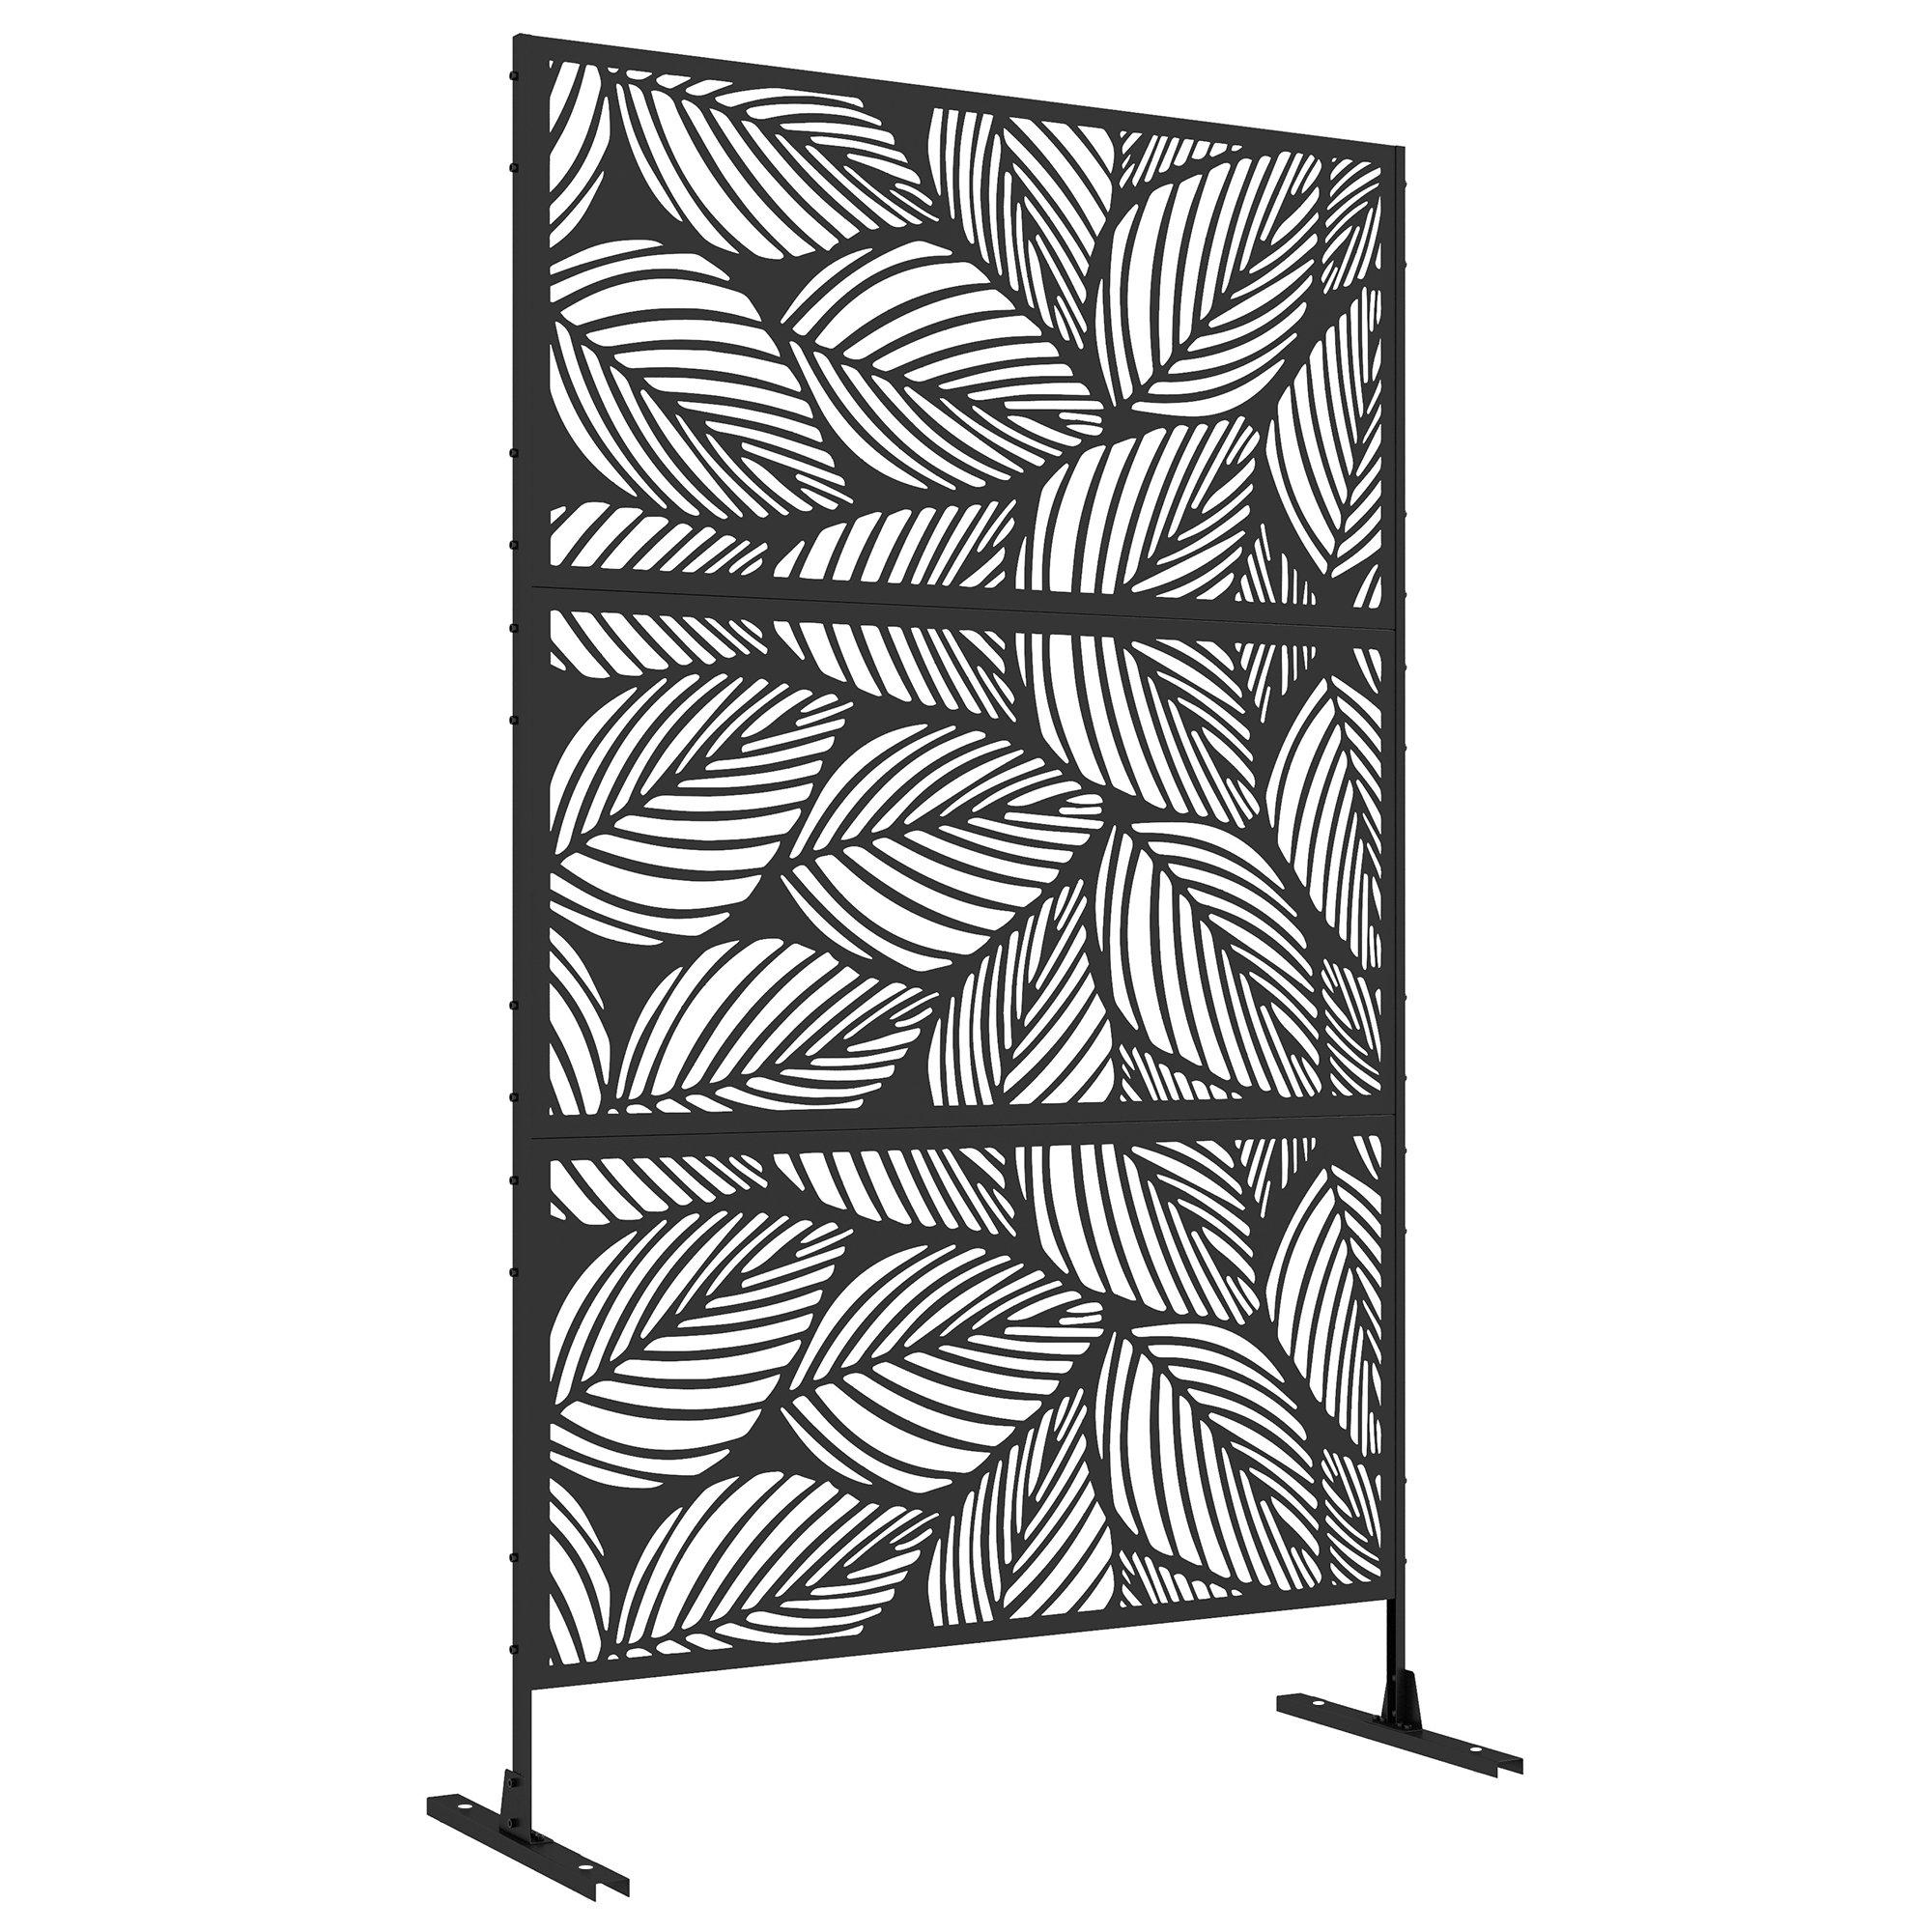 6.5FT Metal Outdoor Privacy Screen Panel w/ Stand, Leaf Style